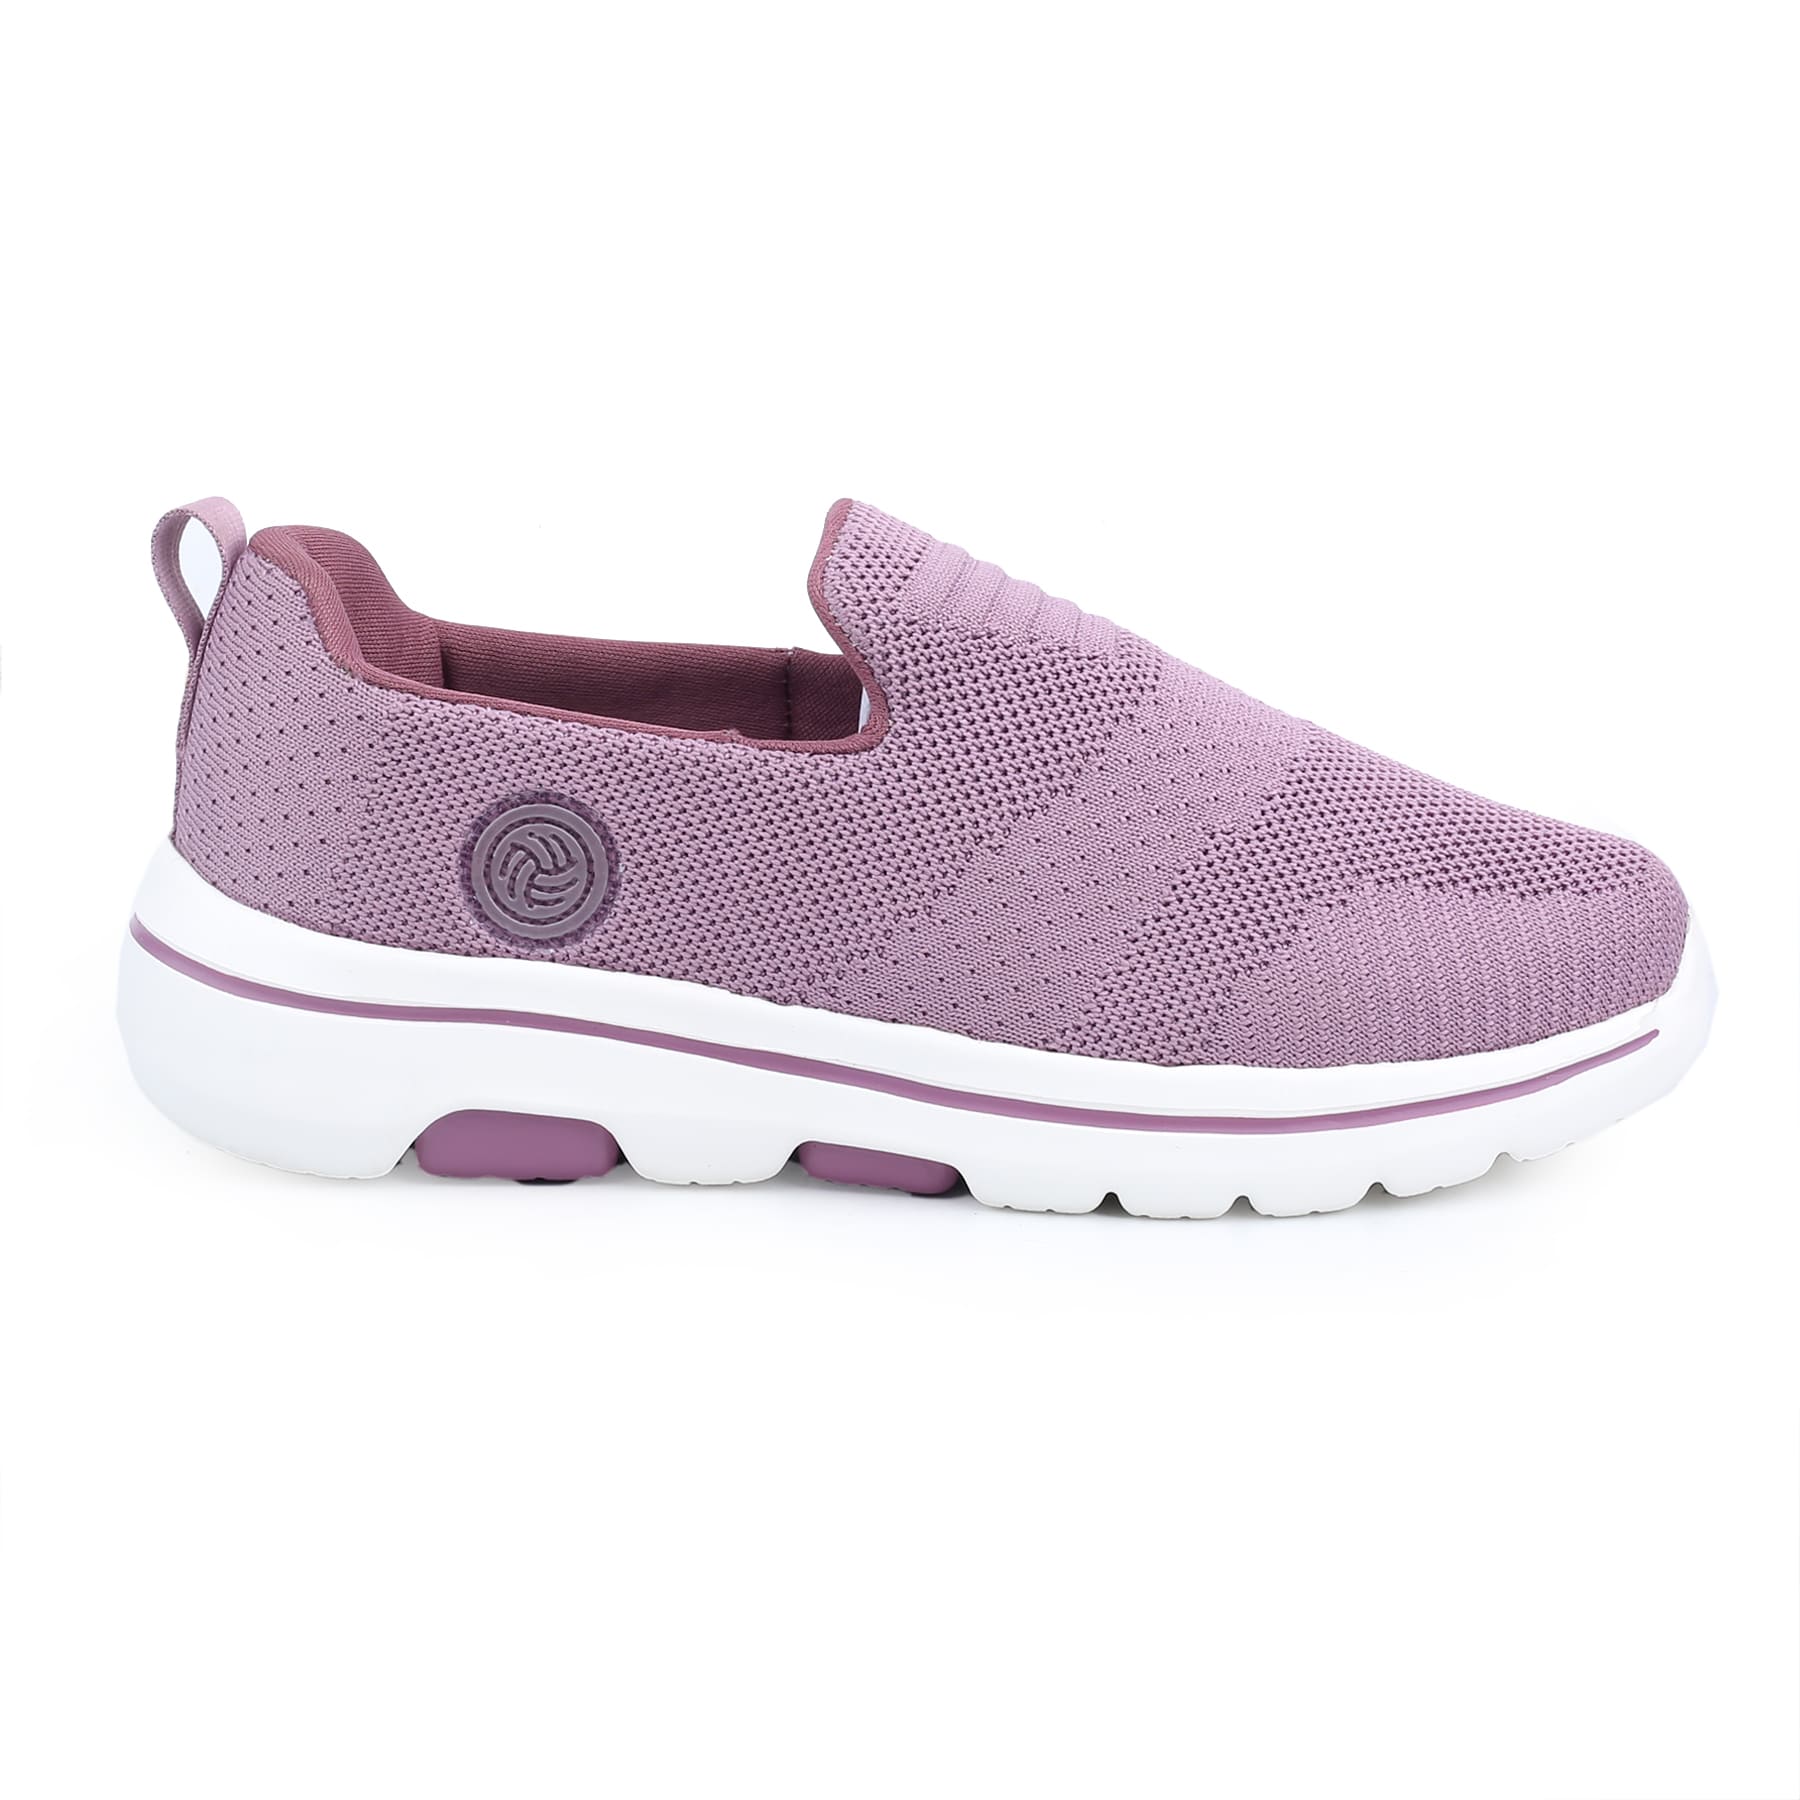 Bacca Bucci NIMBUS Women All-Day wear Joggers Slip-on Walking Shoes with Ortholite Footbed